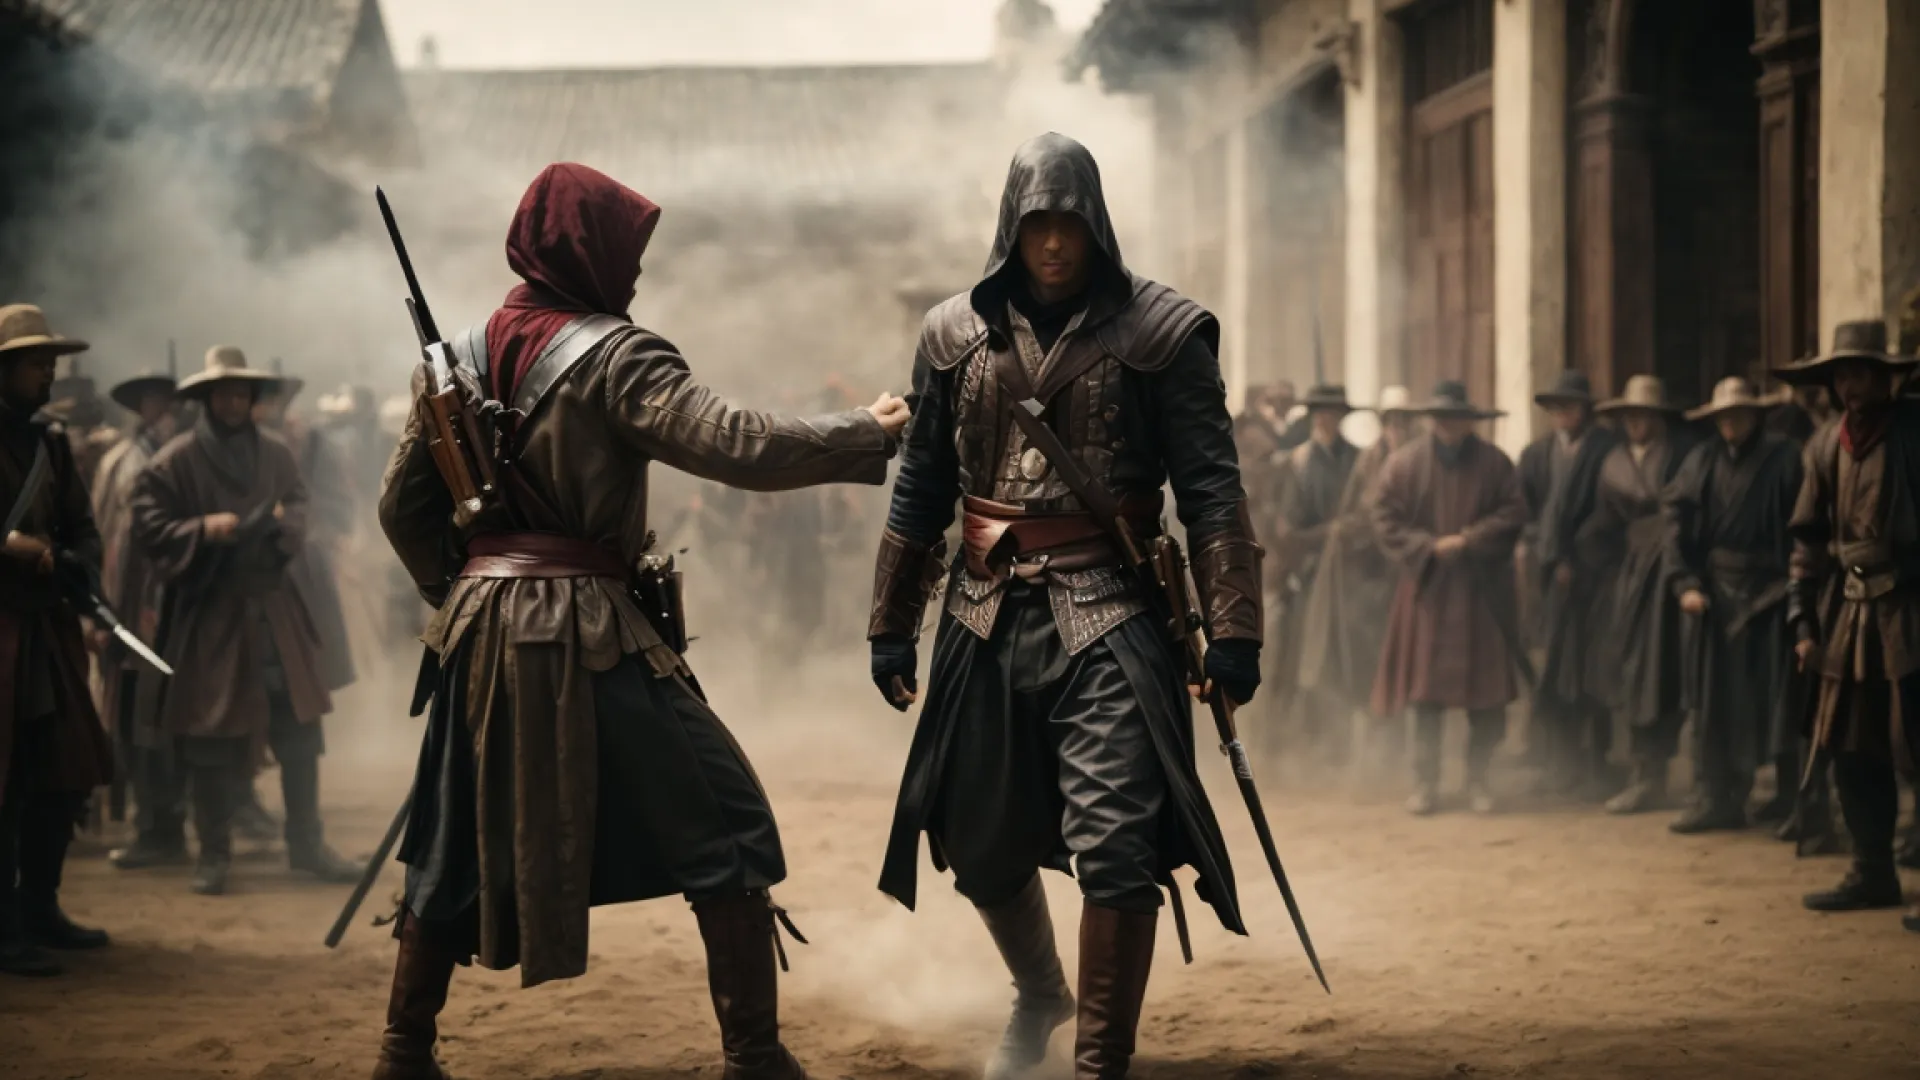 Episode 3: “Assassin’s Creed Unity”